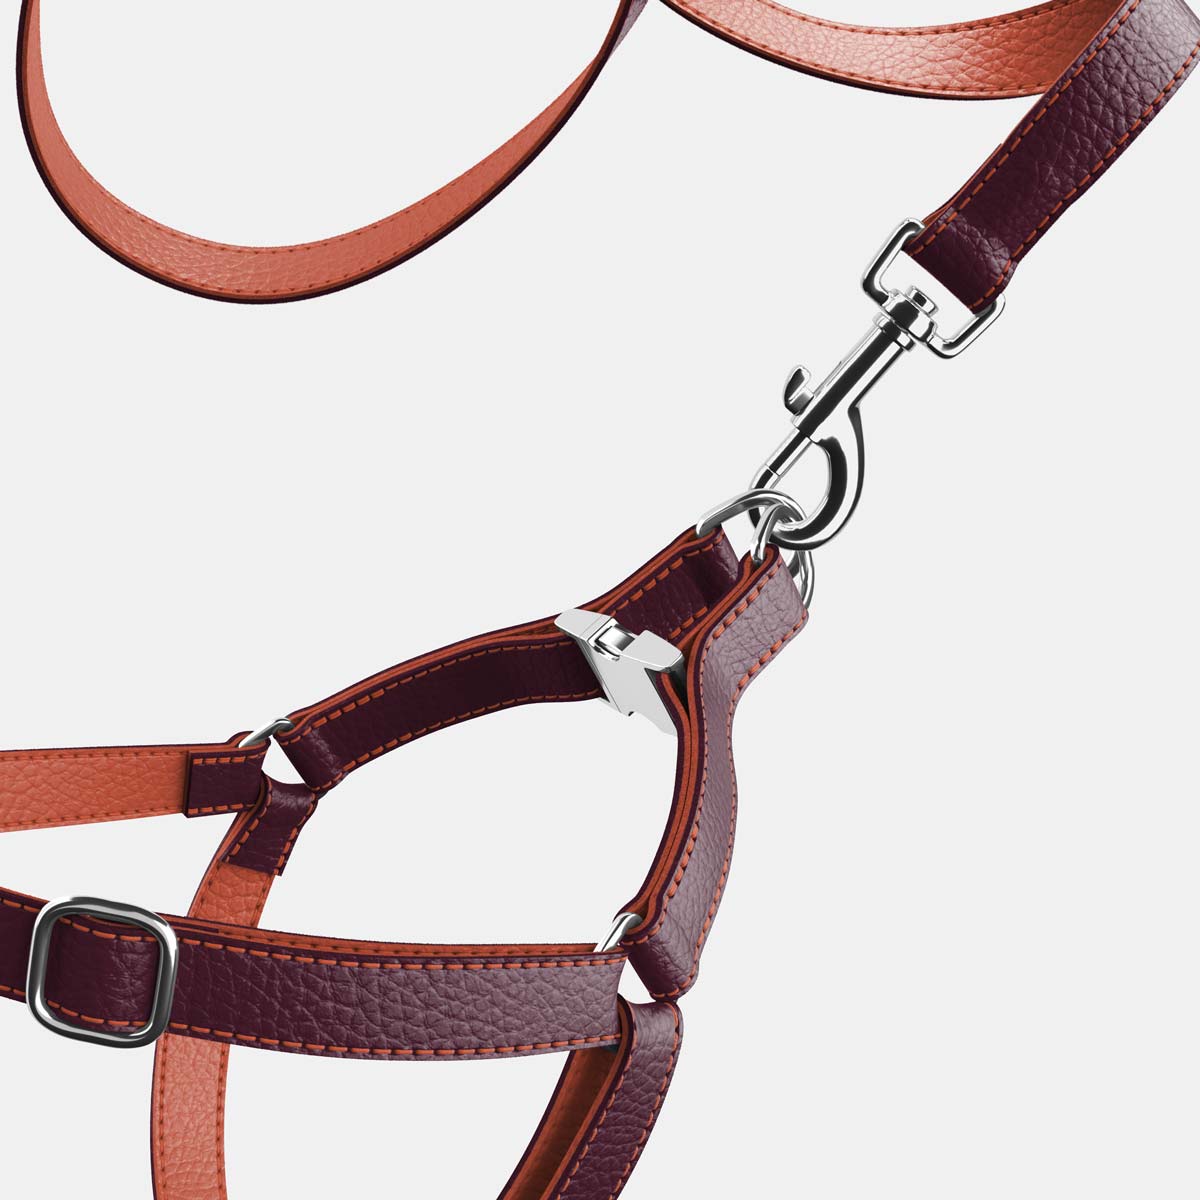 Leather Dog Harness - Dark Purple and Coral